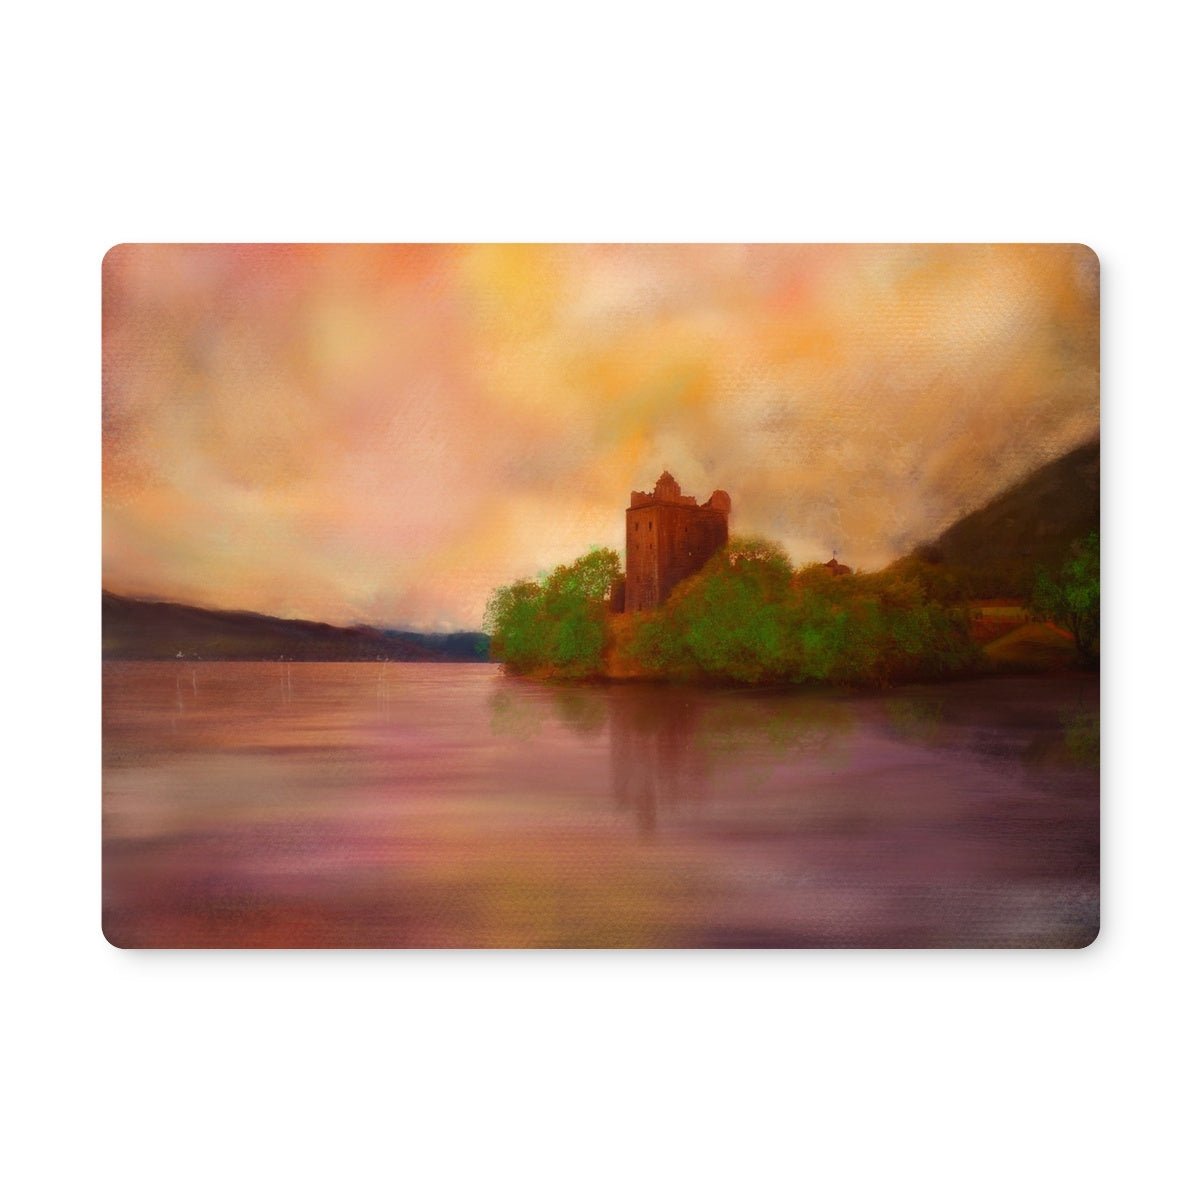 Urquhart Castle Art Gifts Placemat-Placemats-Scottish Castles Art Gallery-6 Placemats-Paintings, Prints, Homeware, Art Gifts From Scotland By Scottish Artist Kevin Hunter